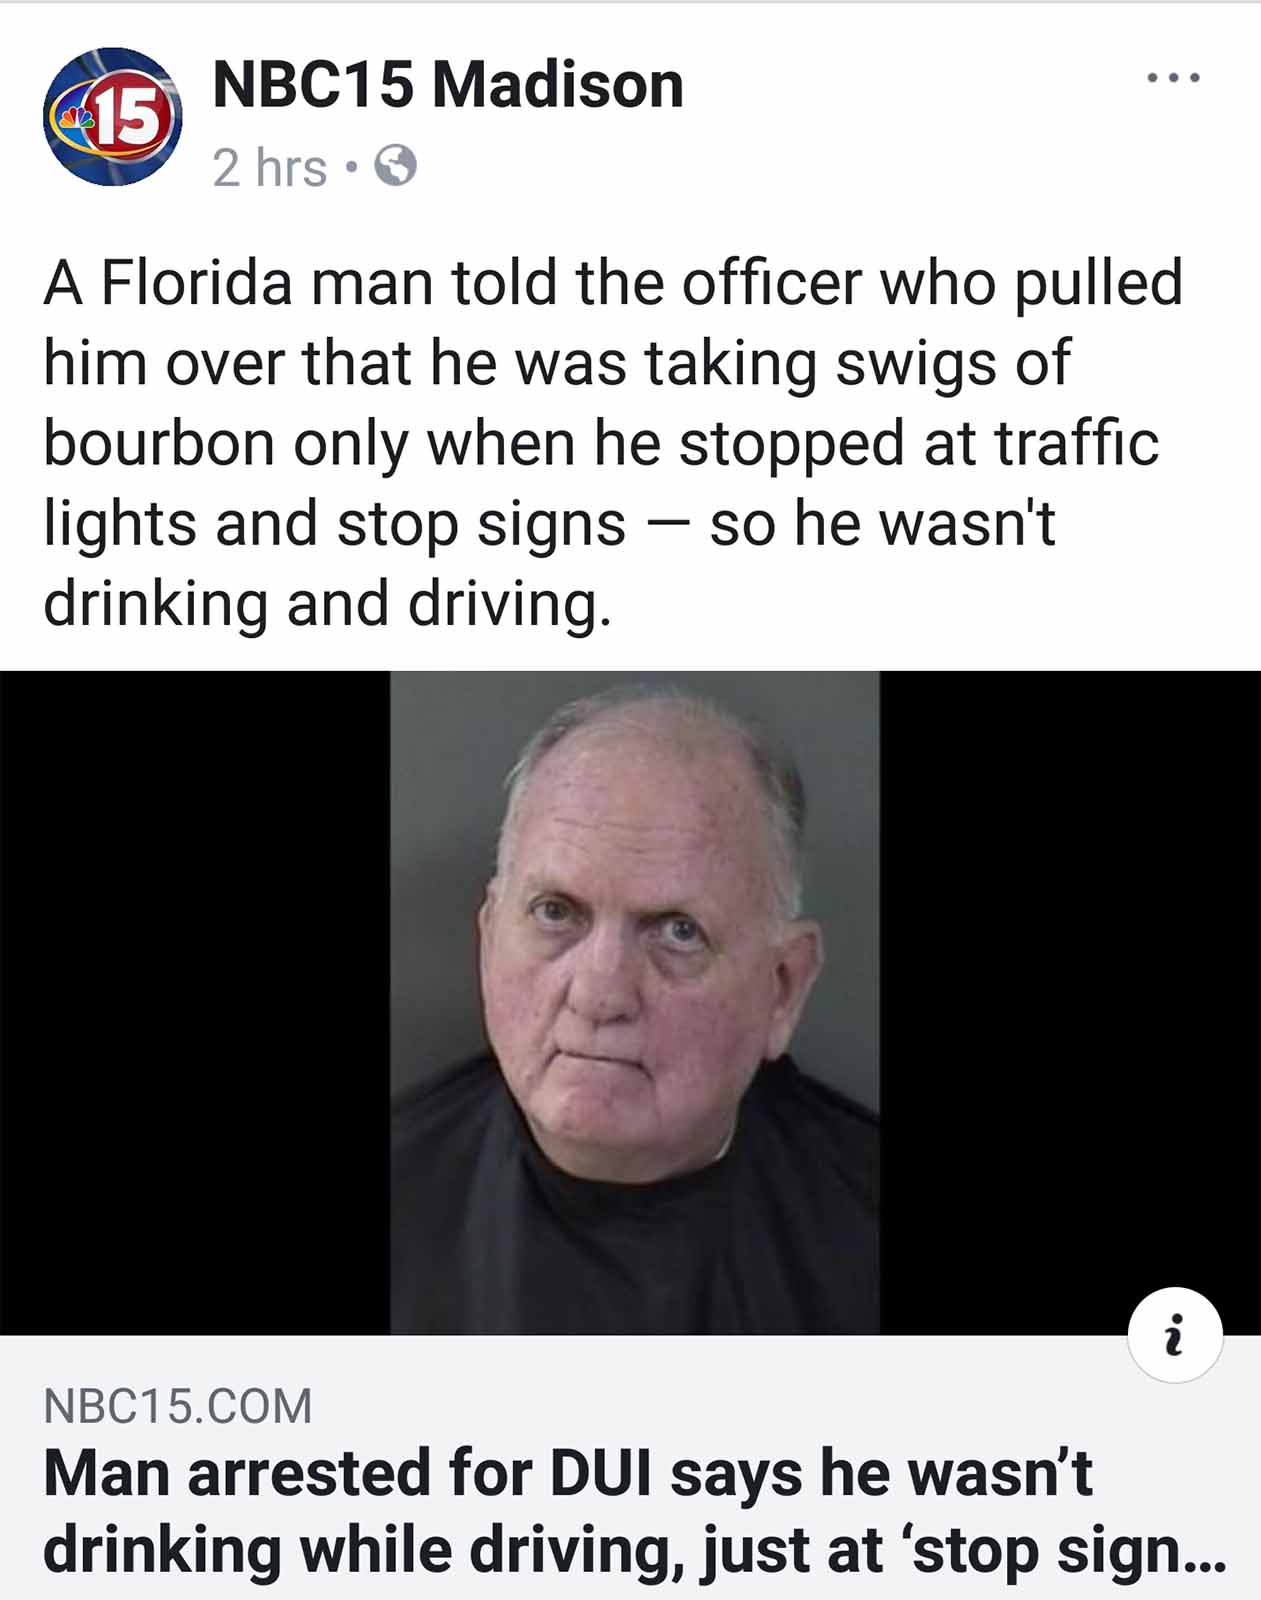 Florida Man headlines are as mindbogging as they are hilarious. How does someone manage to commit such strange crimes? Either way, we're laughing. 